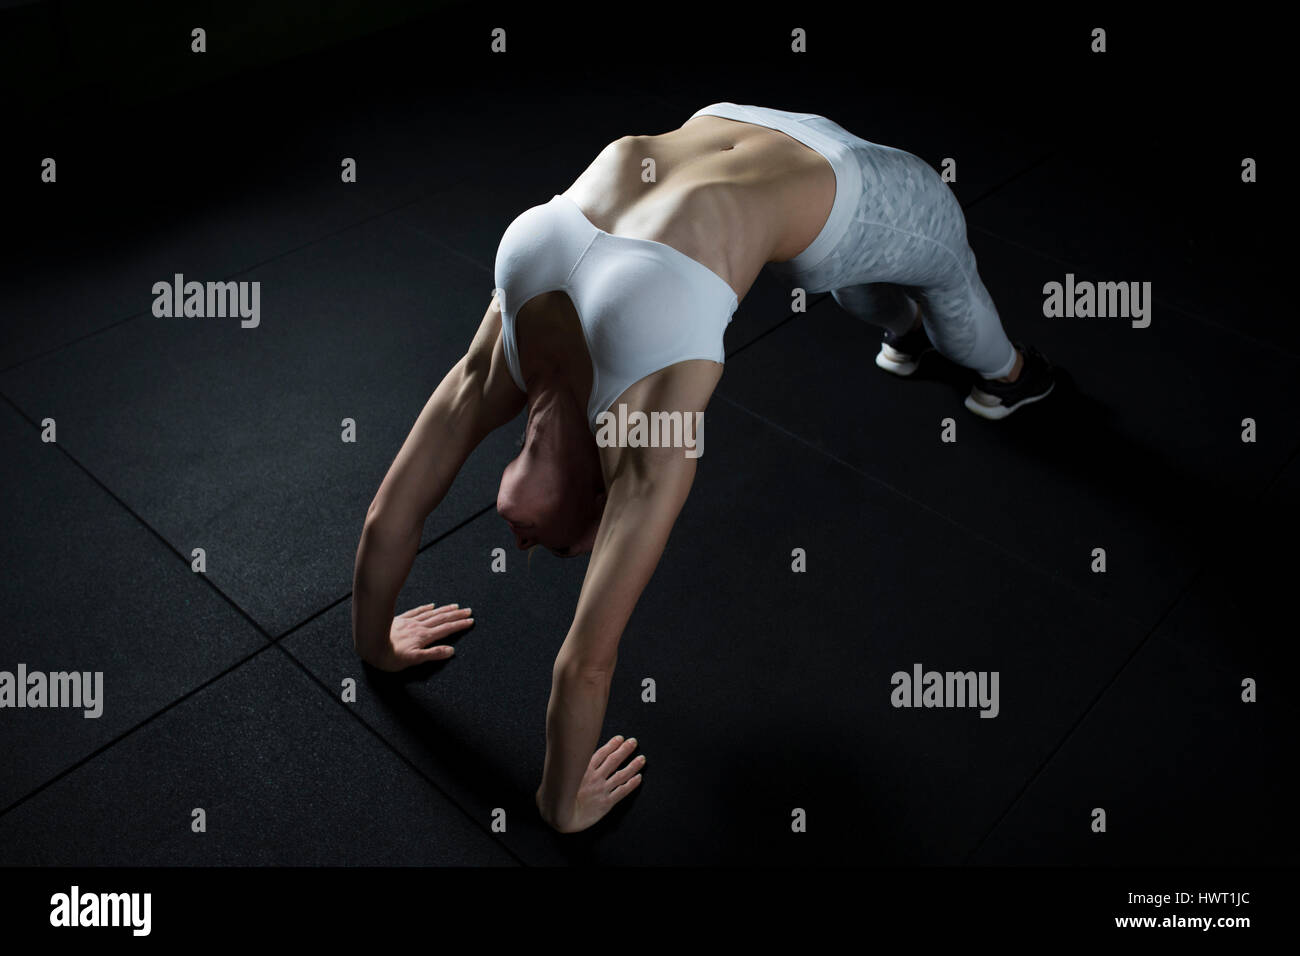 High angle view of woman exercising in gym Stock Photo